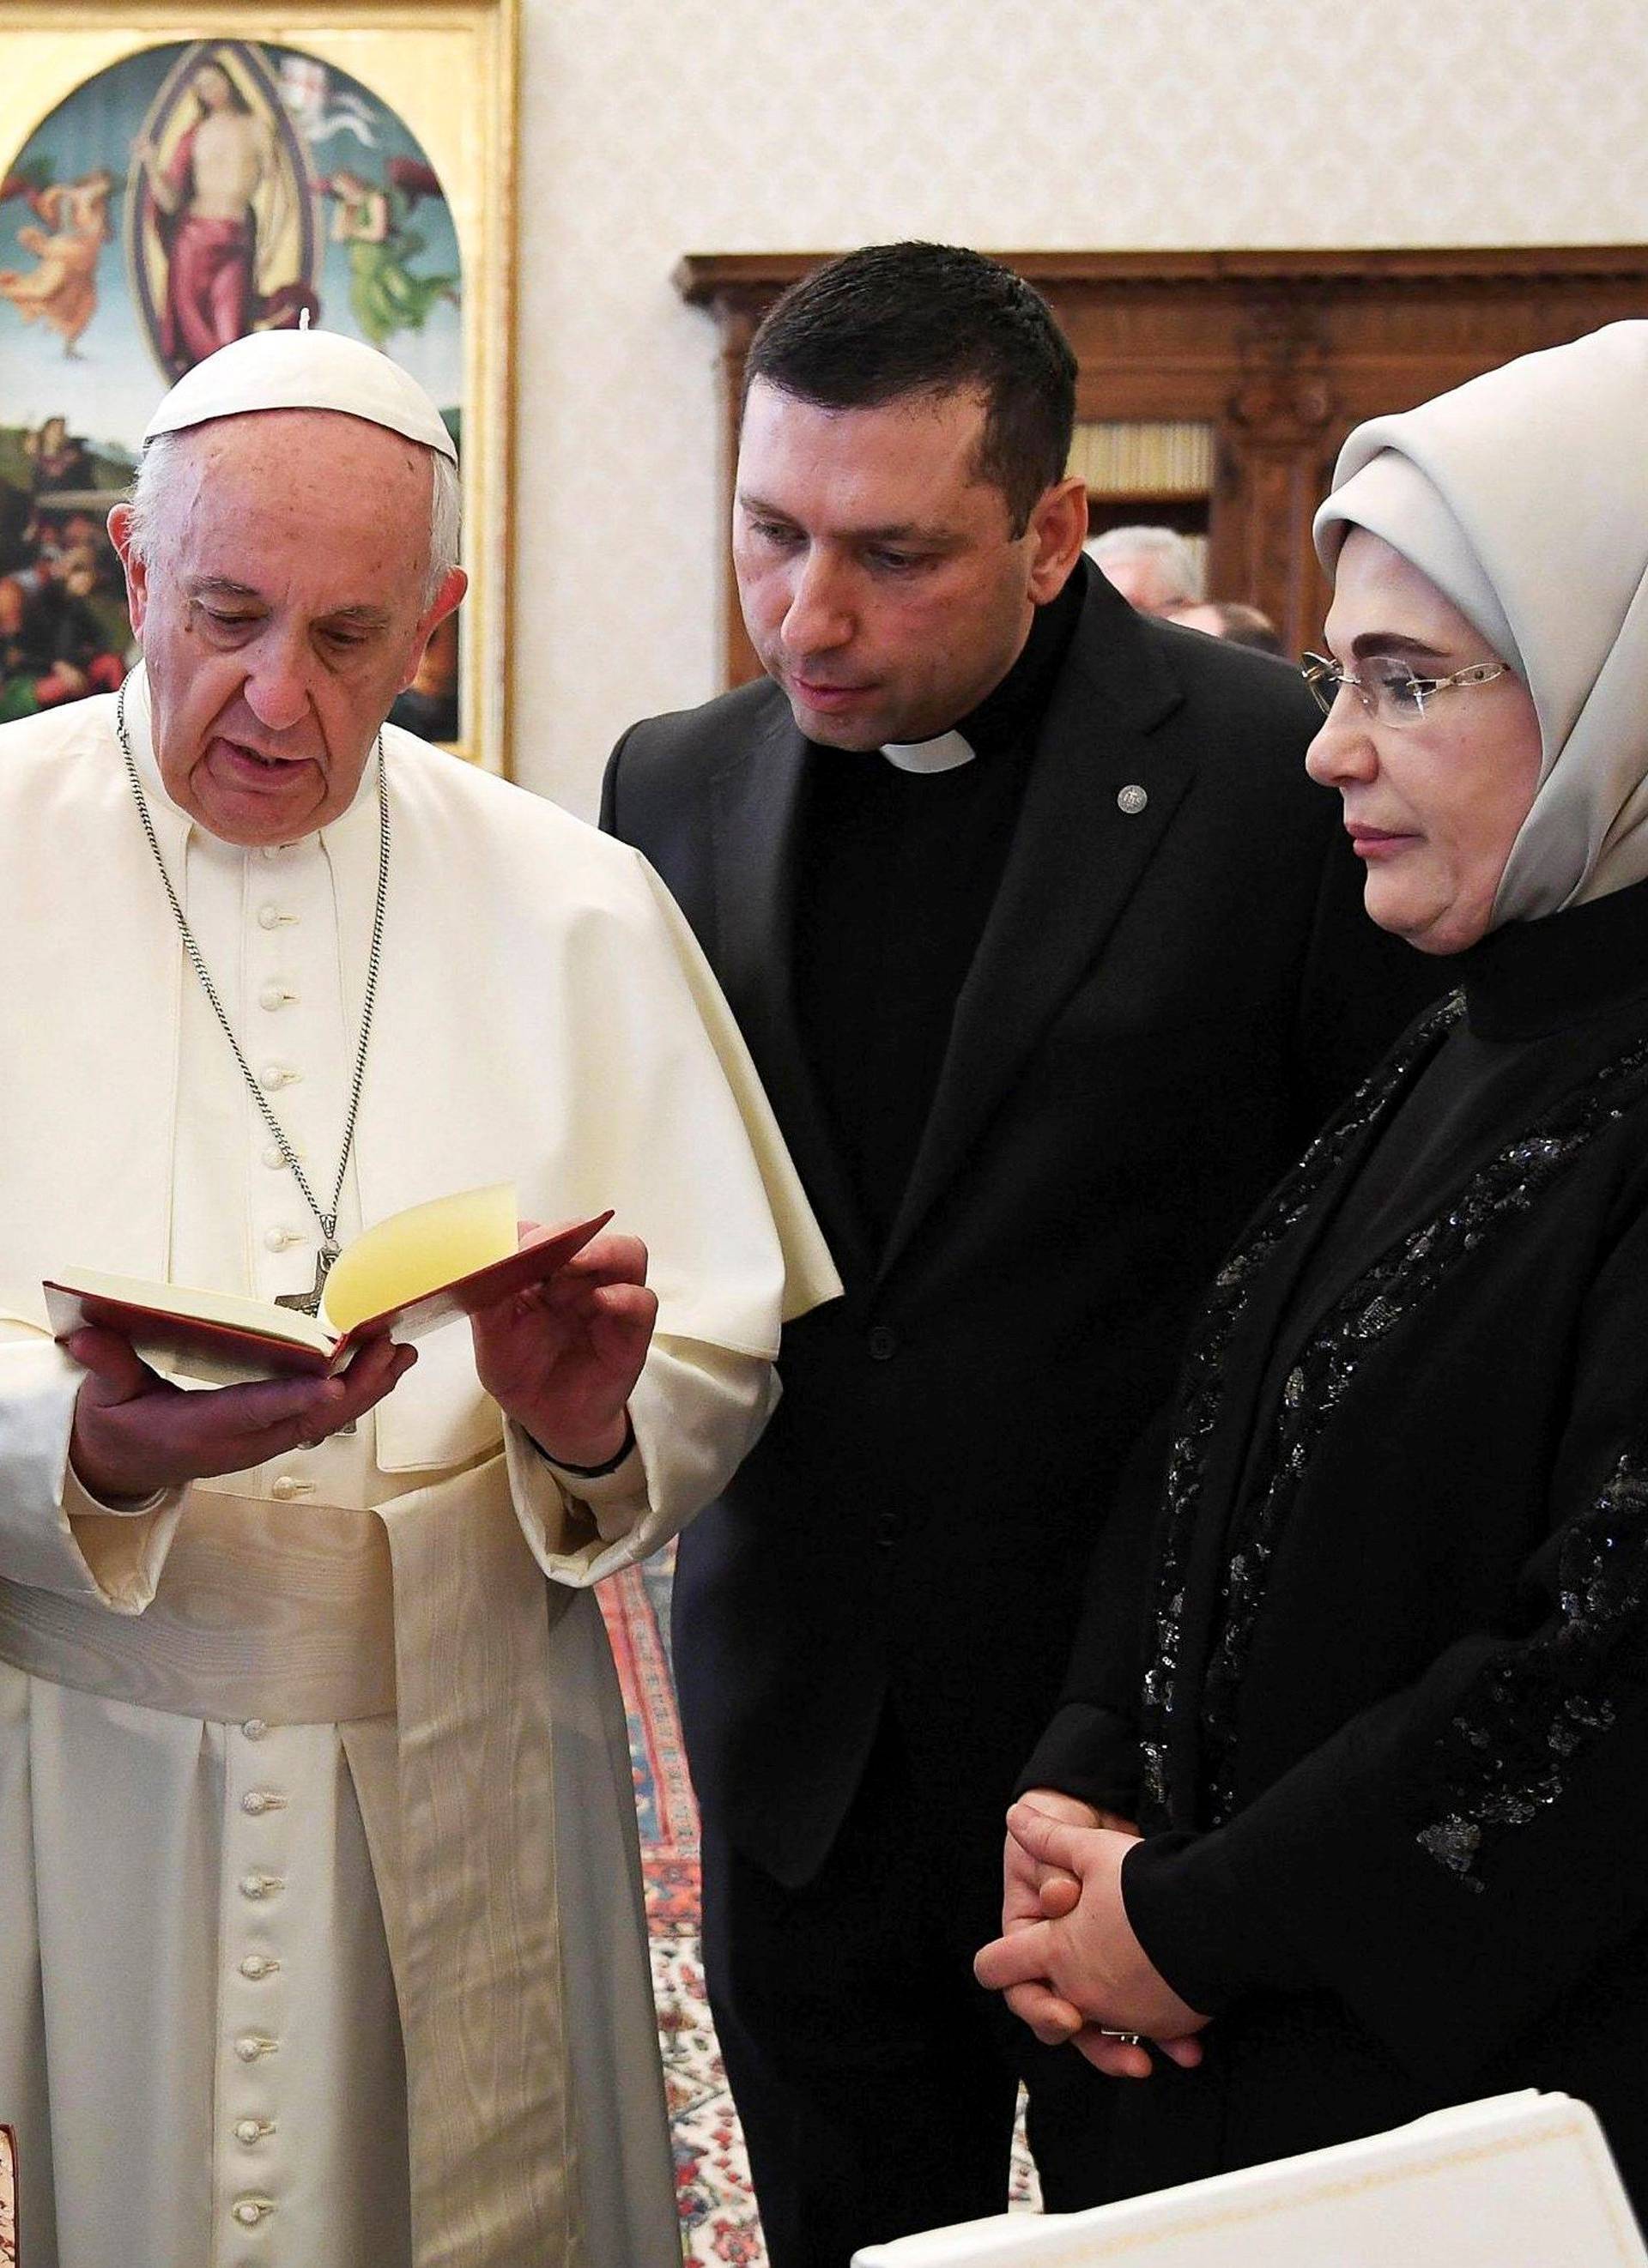 Pope Francis exchanges gift with Turkish President Tayyip Erdogan and his wife Emine during a private audience at the Vatican